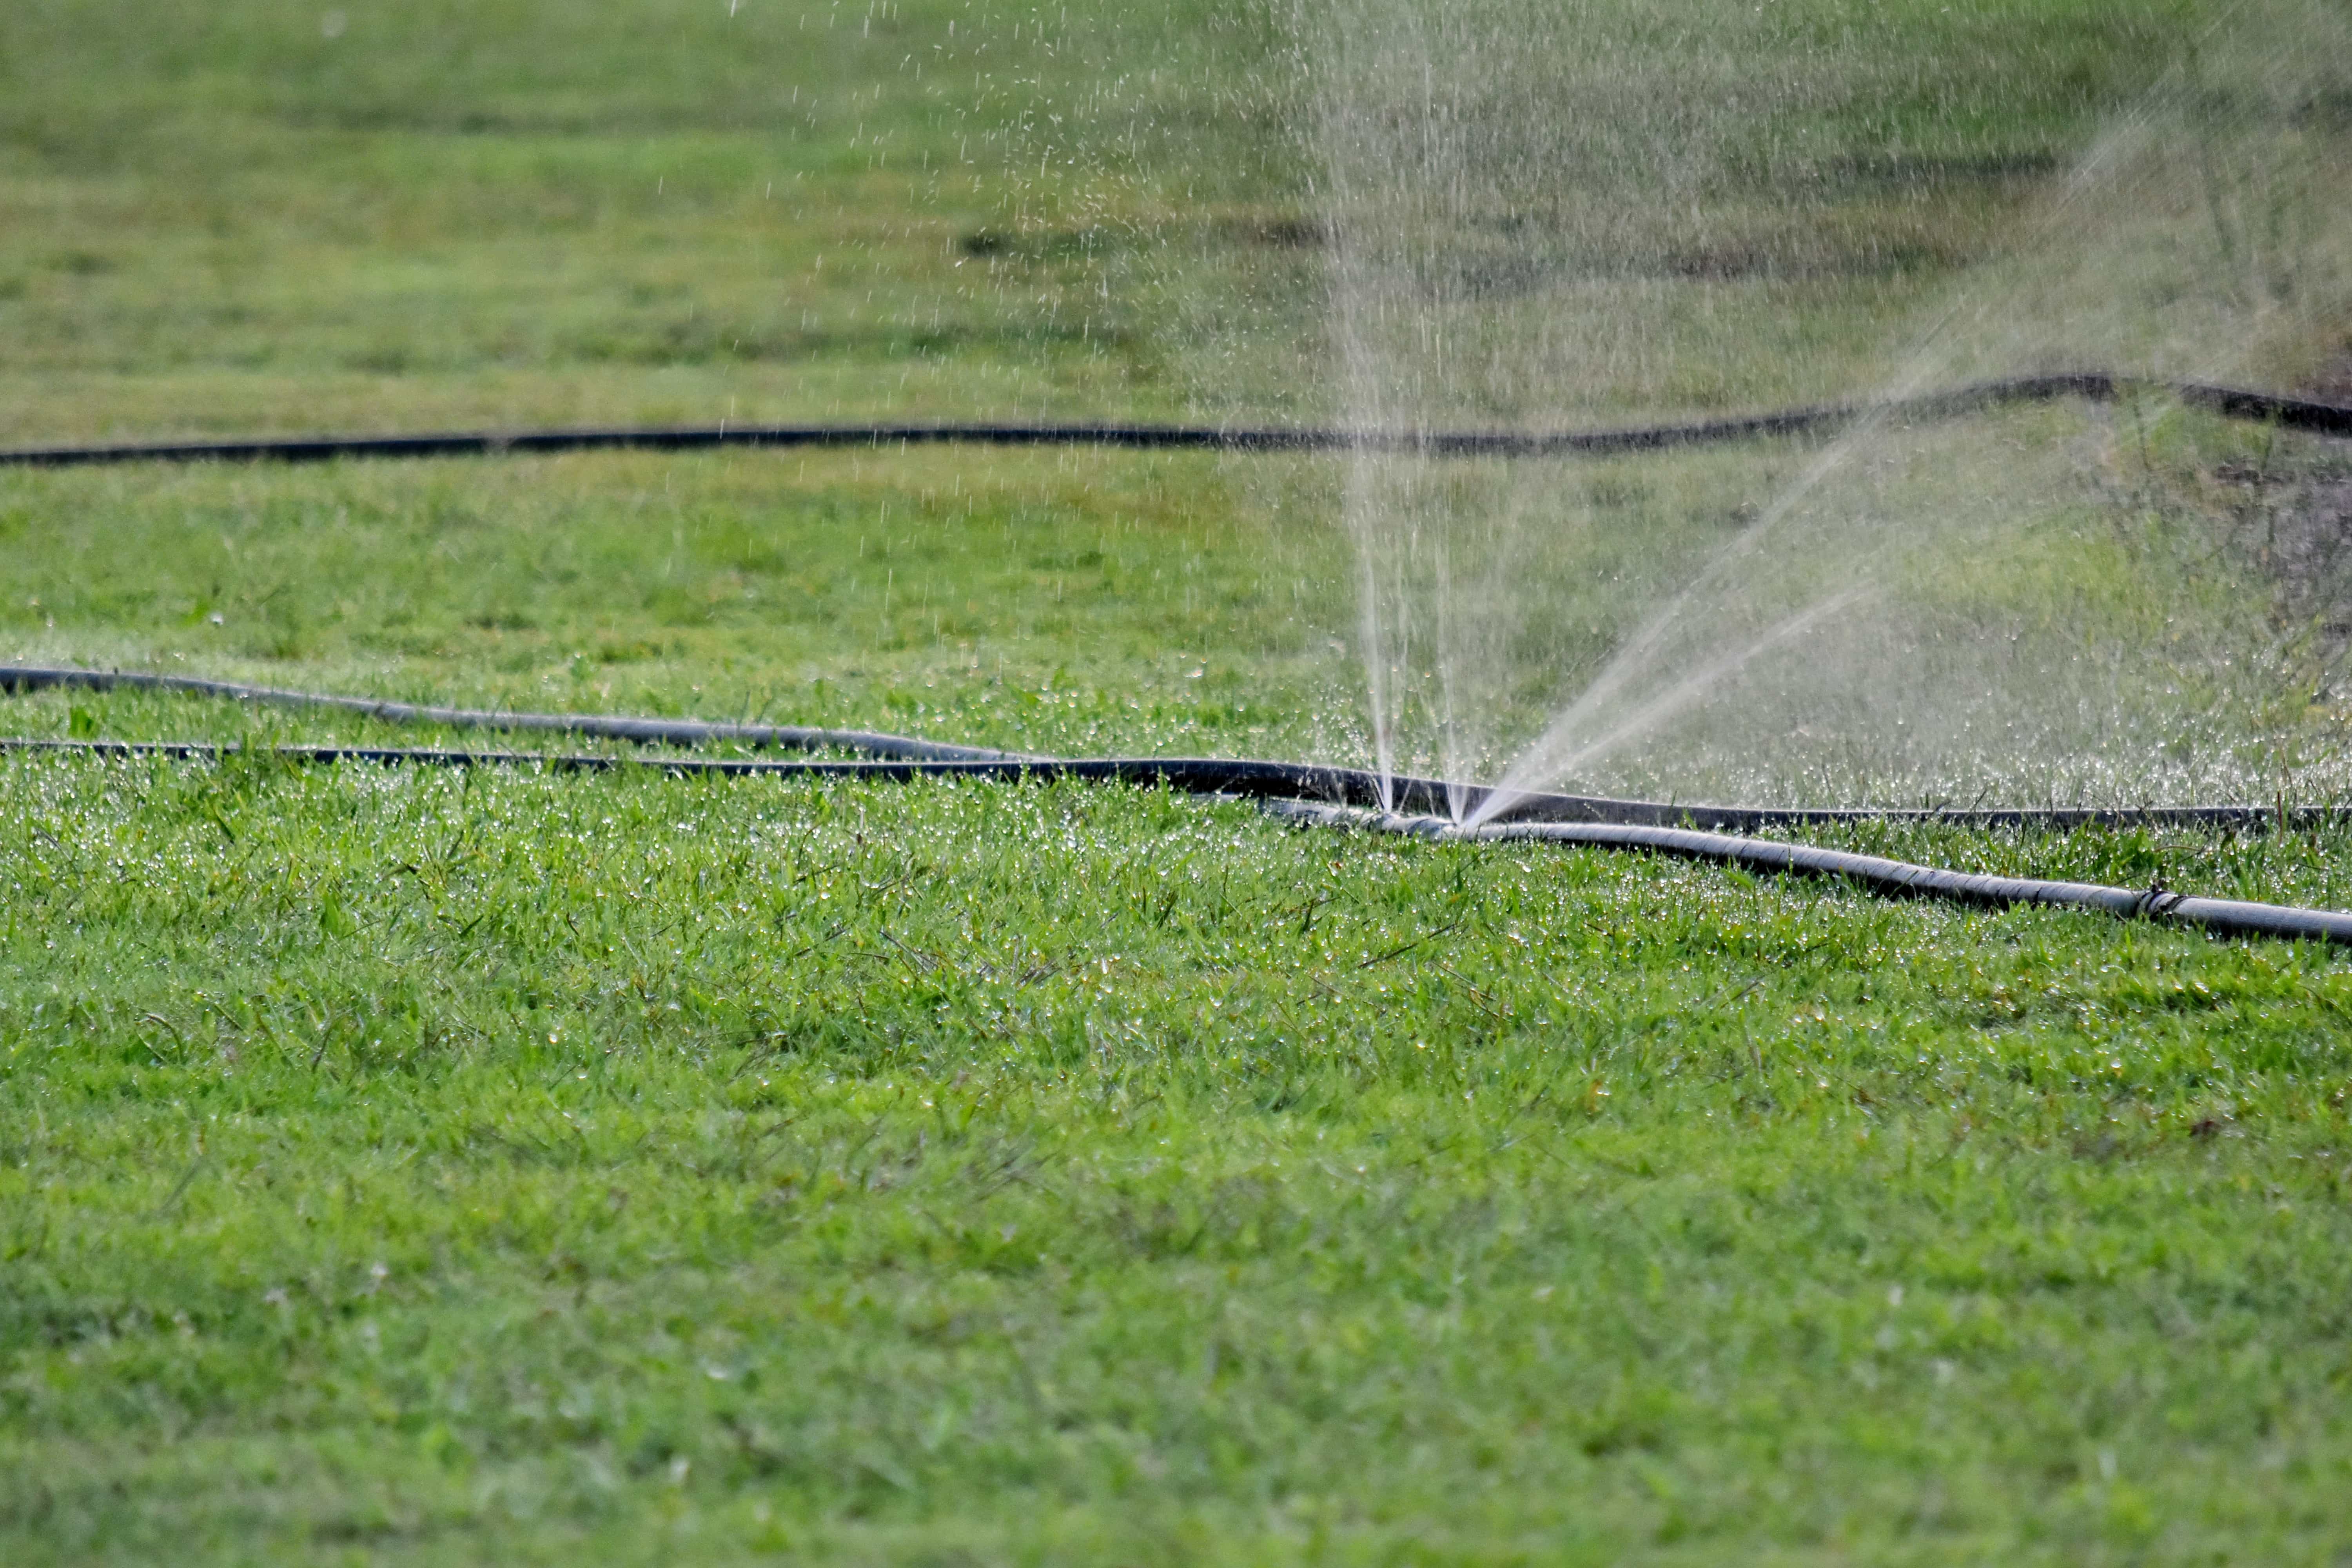 Free picture: field, grass, green grass, irrigation, mechanism, lawn, device, nature, spray, agriculture